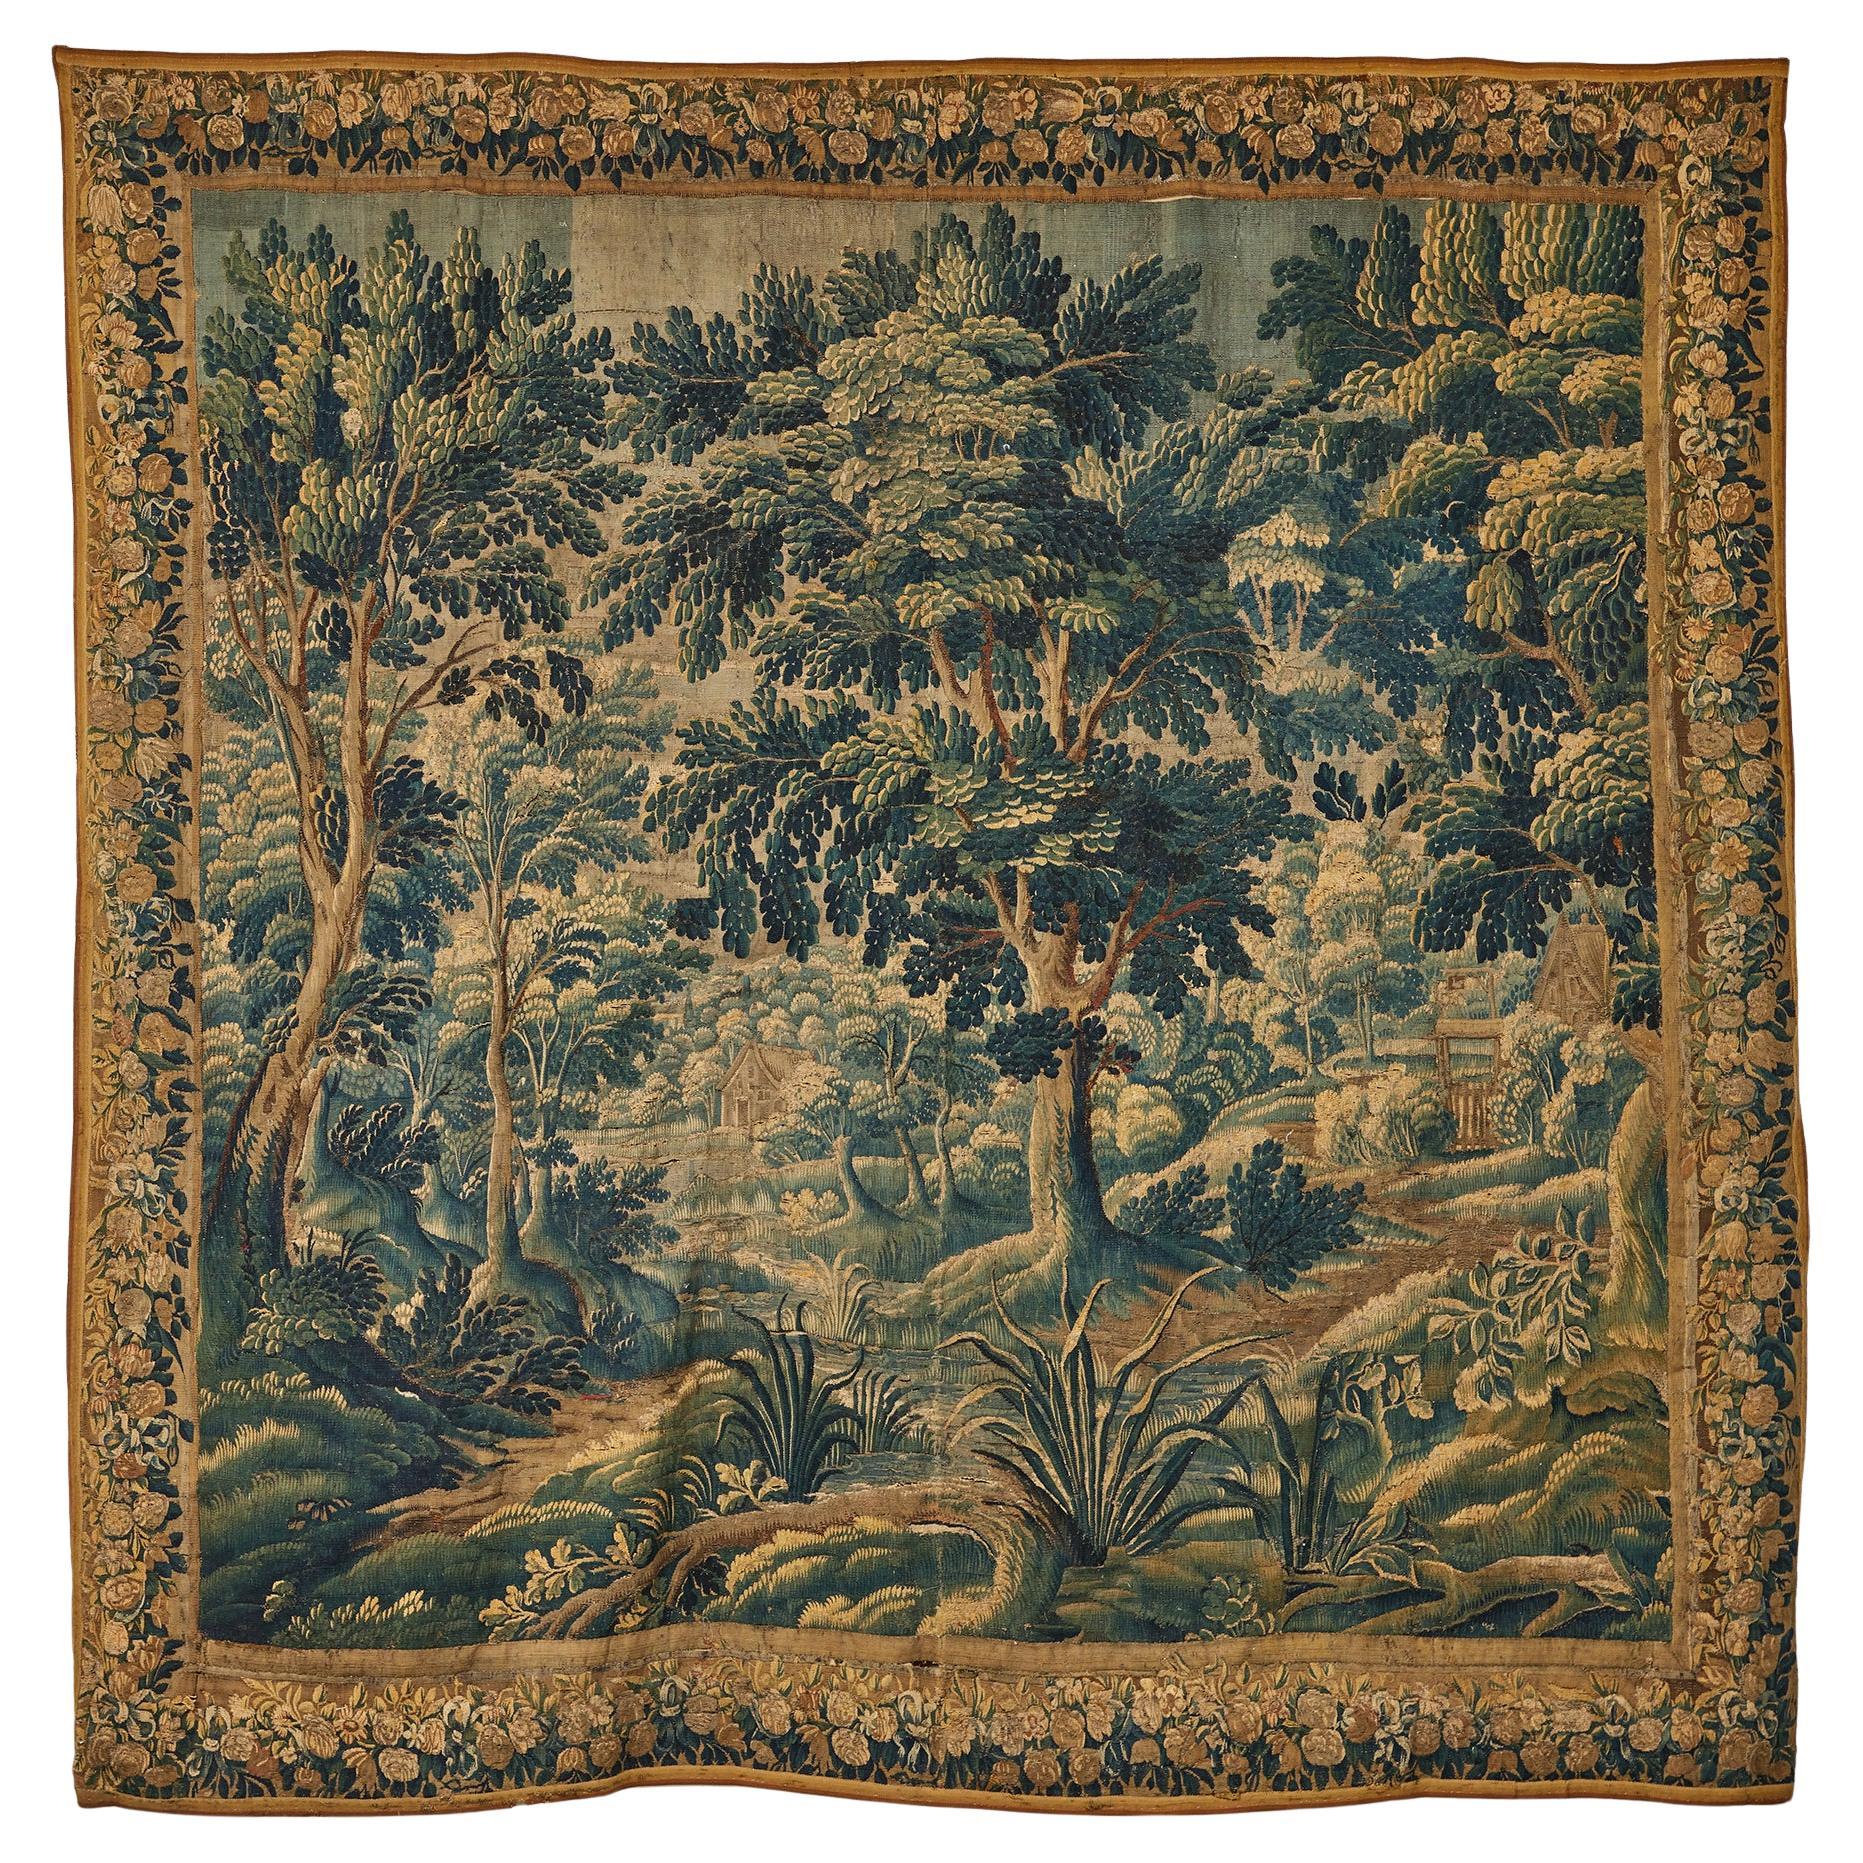 A Late 17th Century Flemish Verdure Tapestry